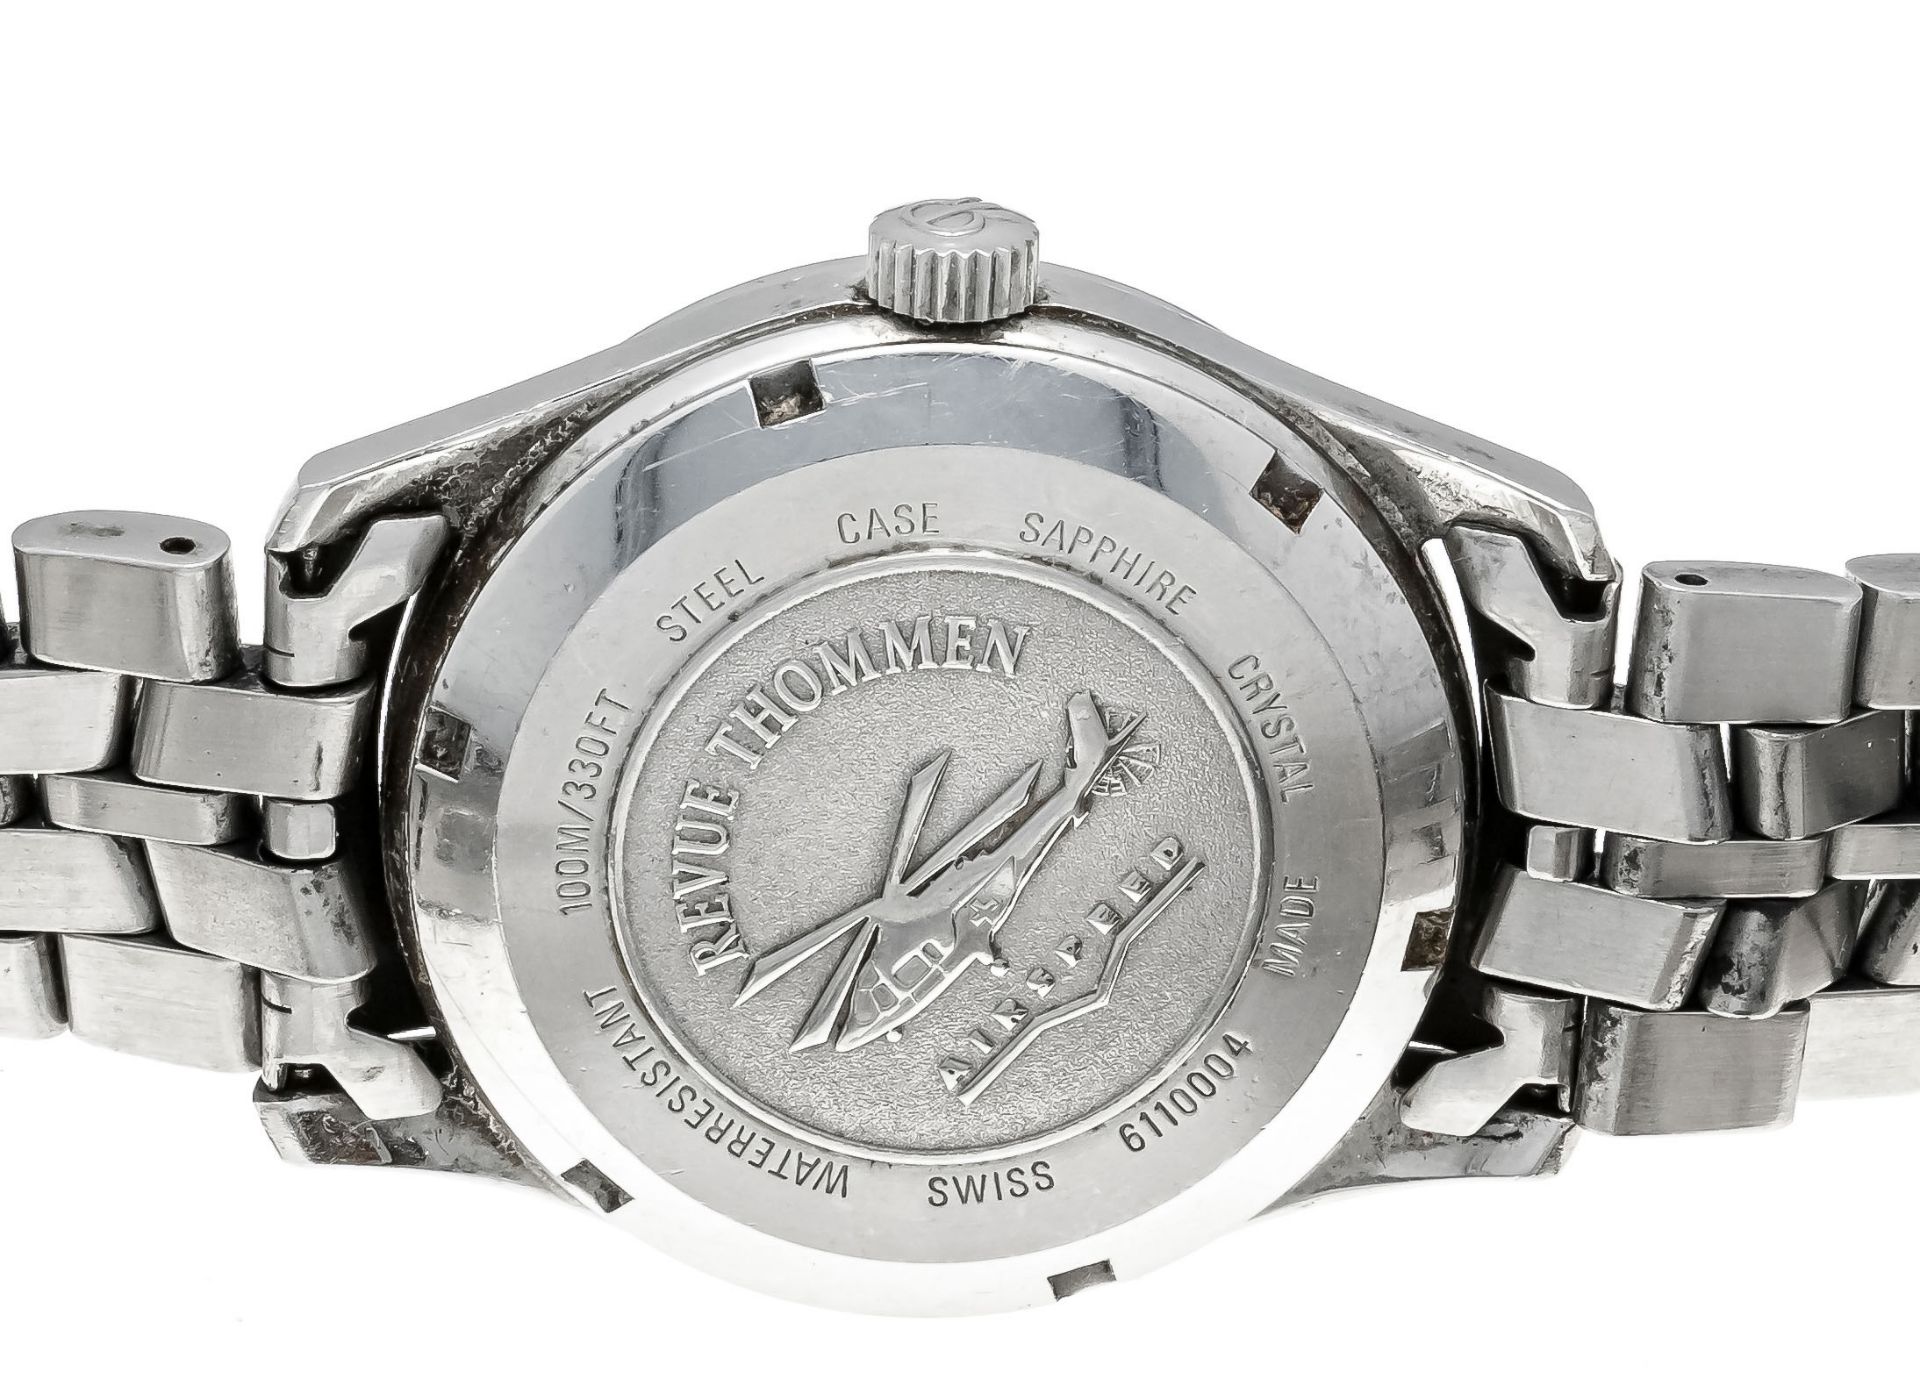 Revue Thommmen Airspeed men's automatic watch, steel bracelet, from 1995, ref. 16003.2, with ETA - Image 2 of 4